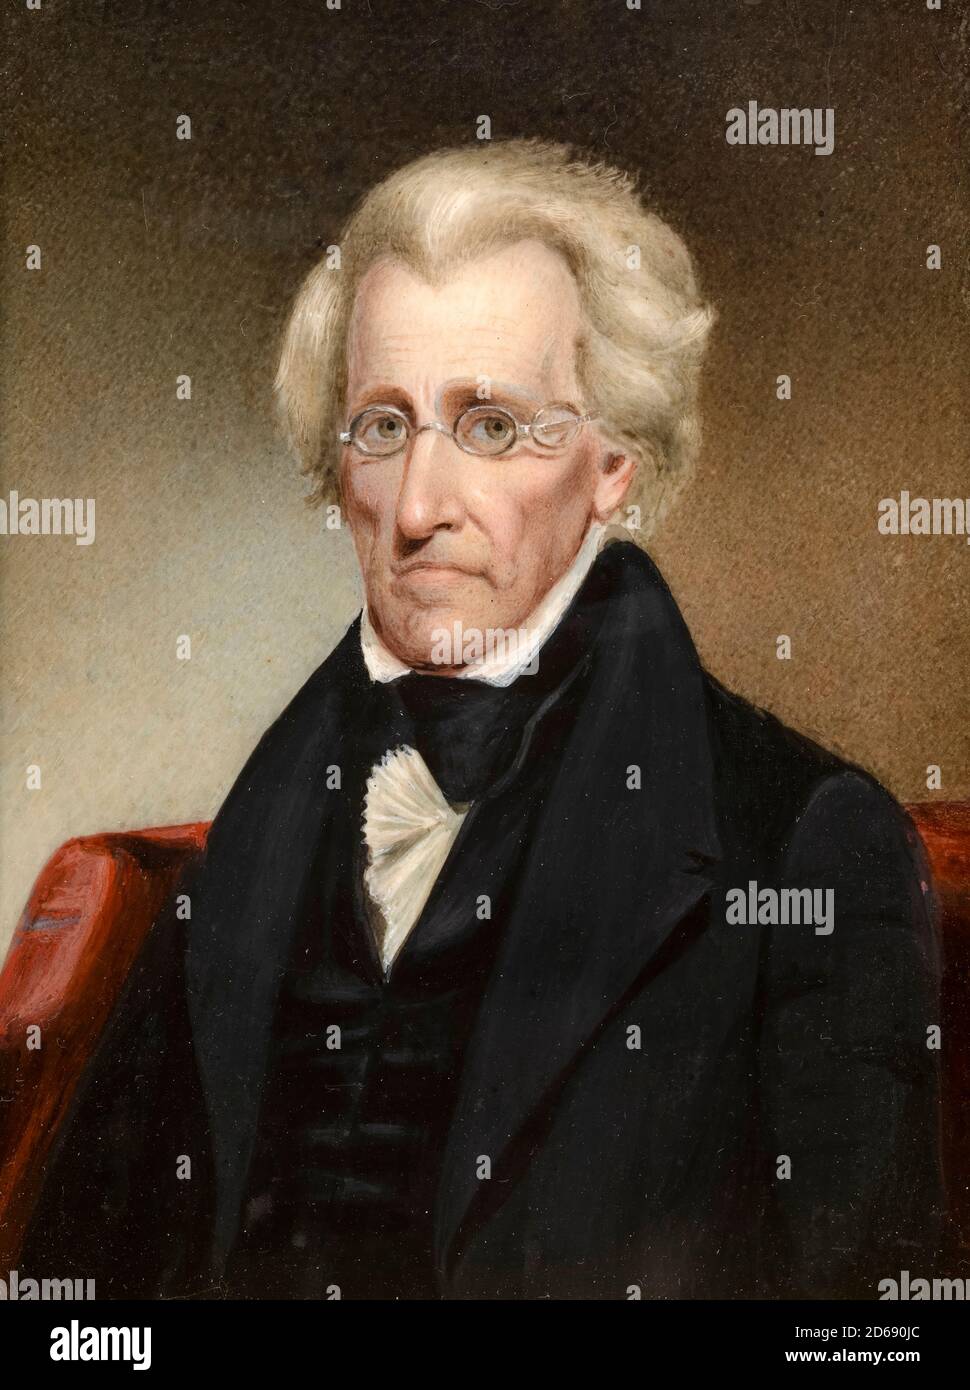 Andrew Jackson (1767-1845), American statesman who served as the seventh President of the United States, portrait painting by James Tooley Jr, 1840 Stock Photo